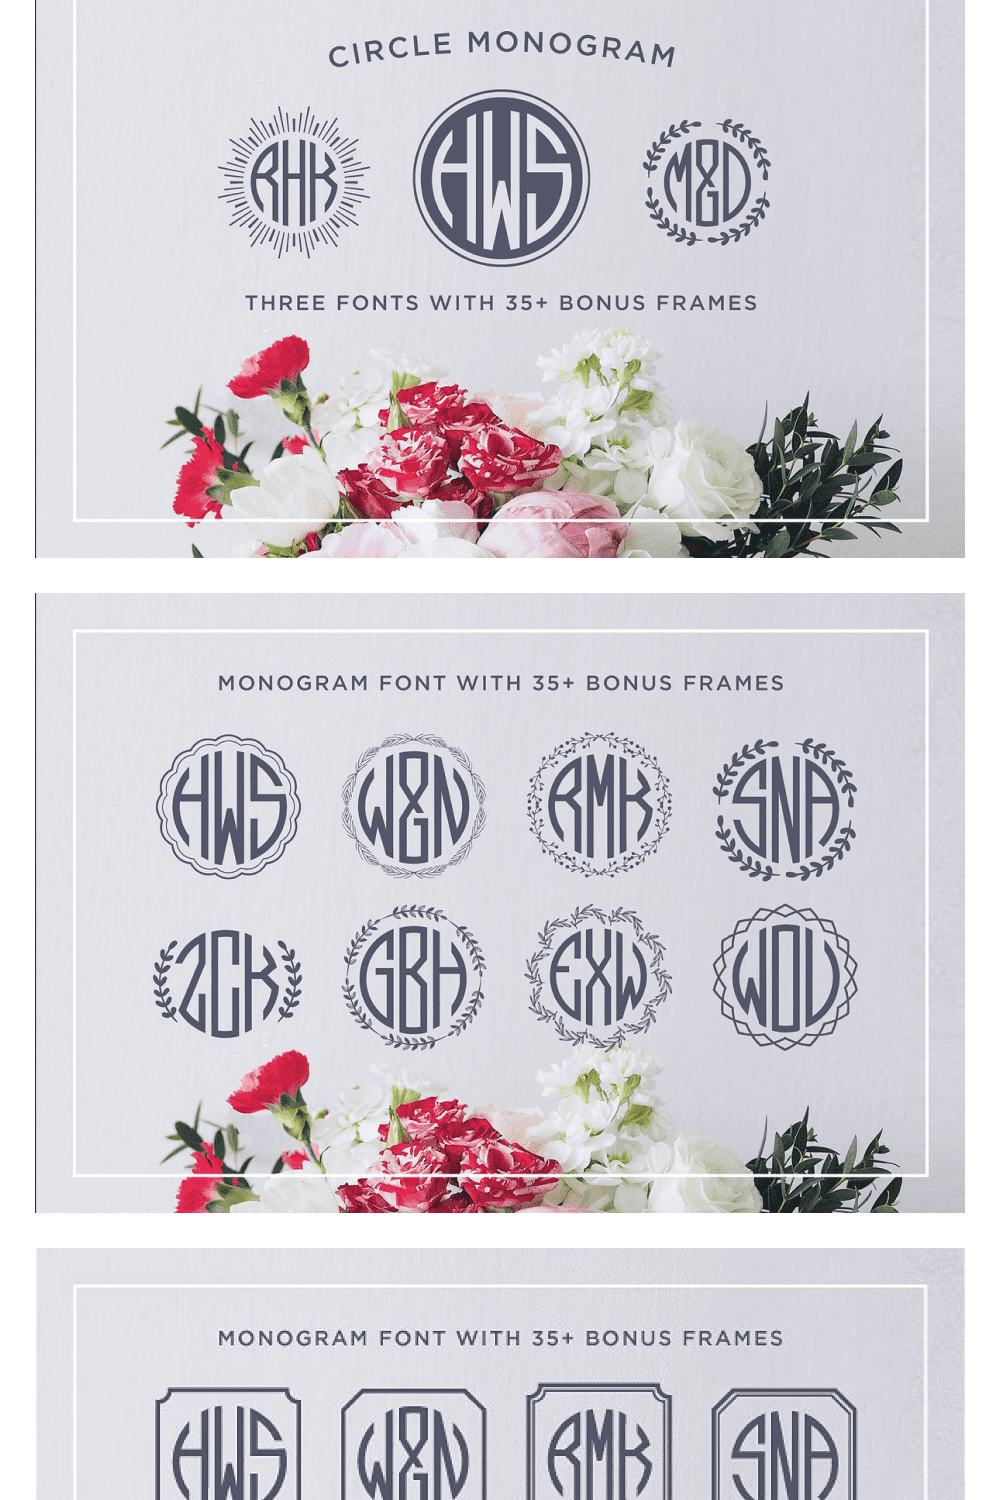 Make gorgeous three letter circle monograms quickly and easily in any program, even Word or Pages.